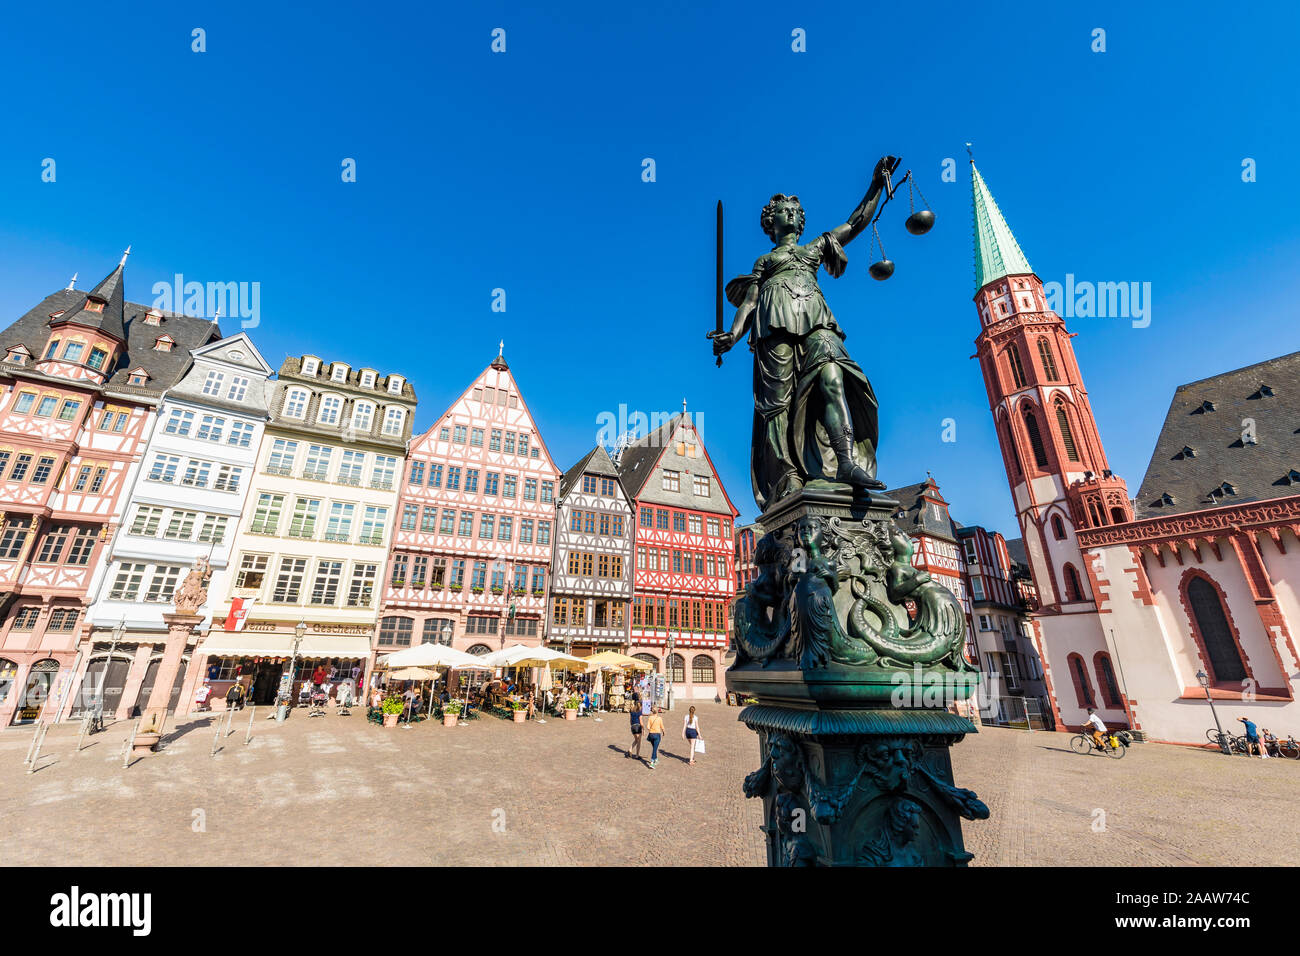 Statue Of Lady Justice at Römerberg Old Town Square against clear sky in Frankfurt, Germany Stock Photo